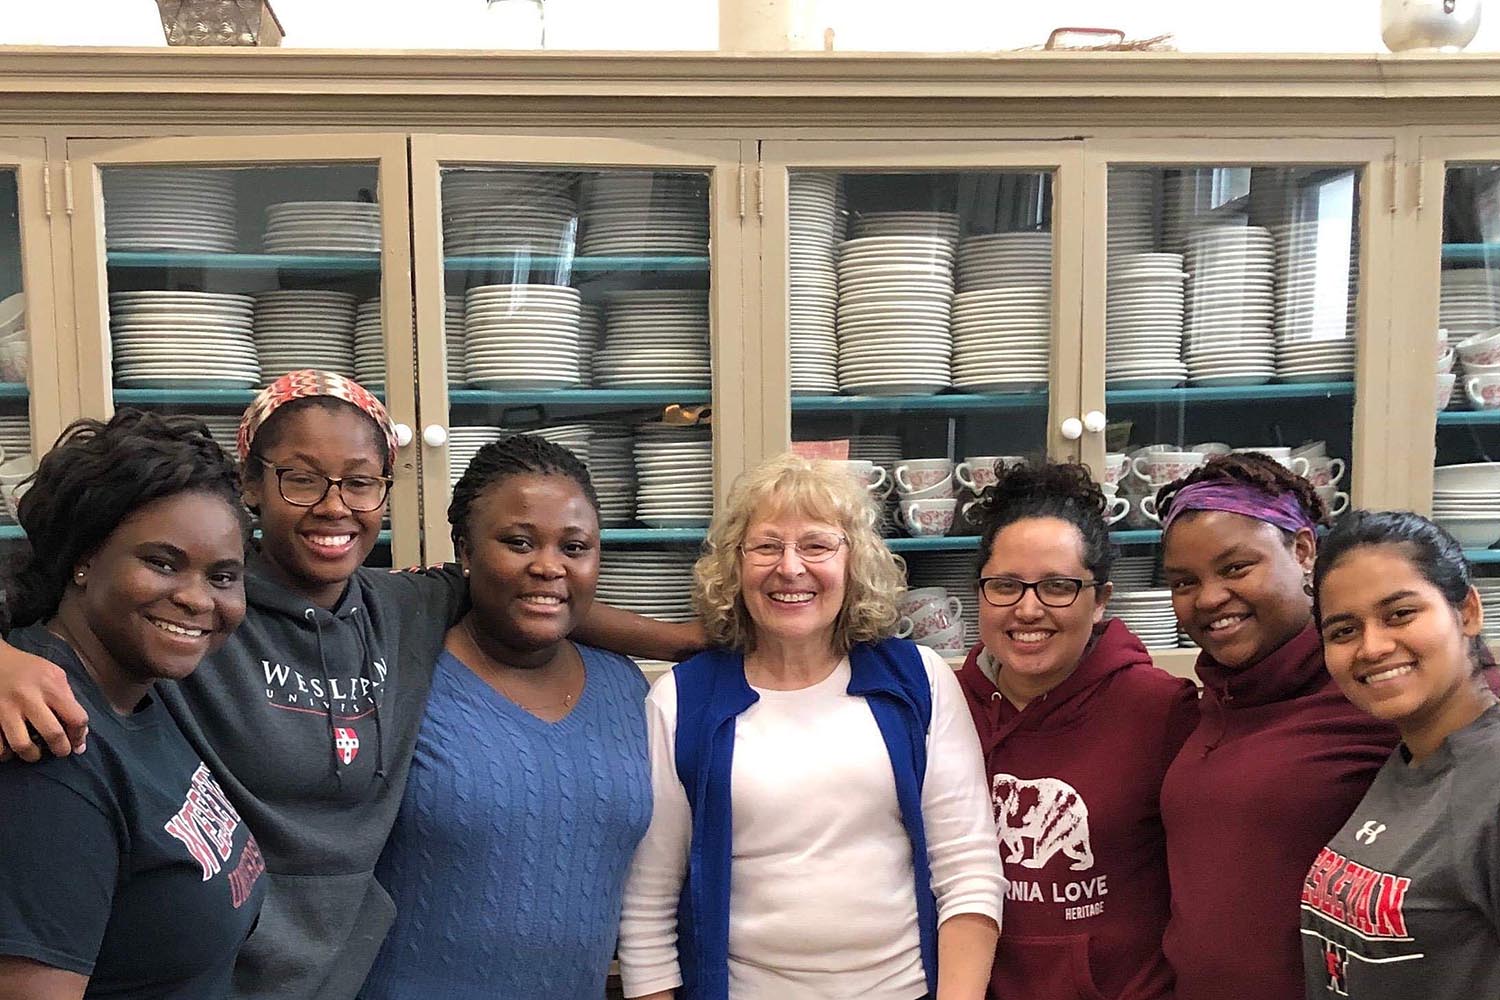 During the Interfaith Service Trip, representatives from Wesleyan volunteered at the Manna House Soup Kitchen in Newtown, N.J.